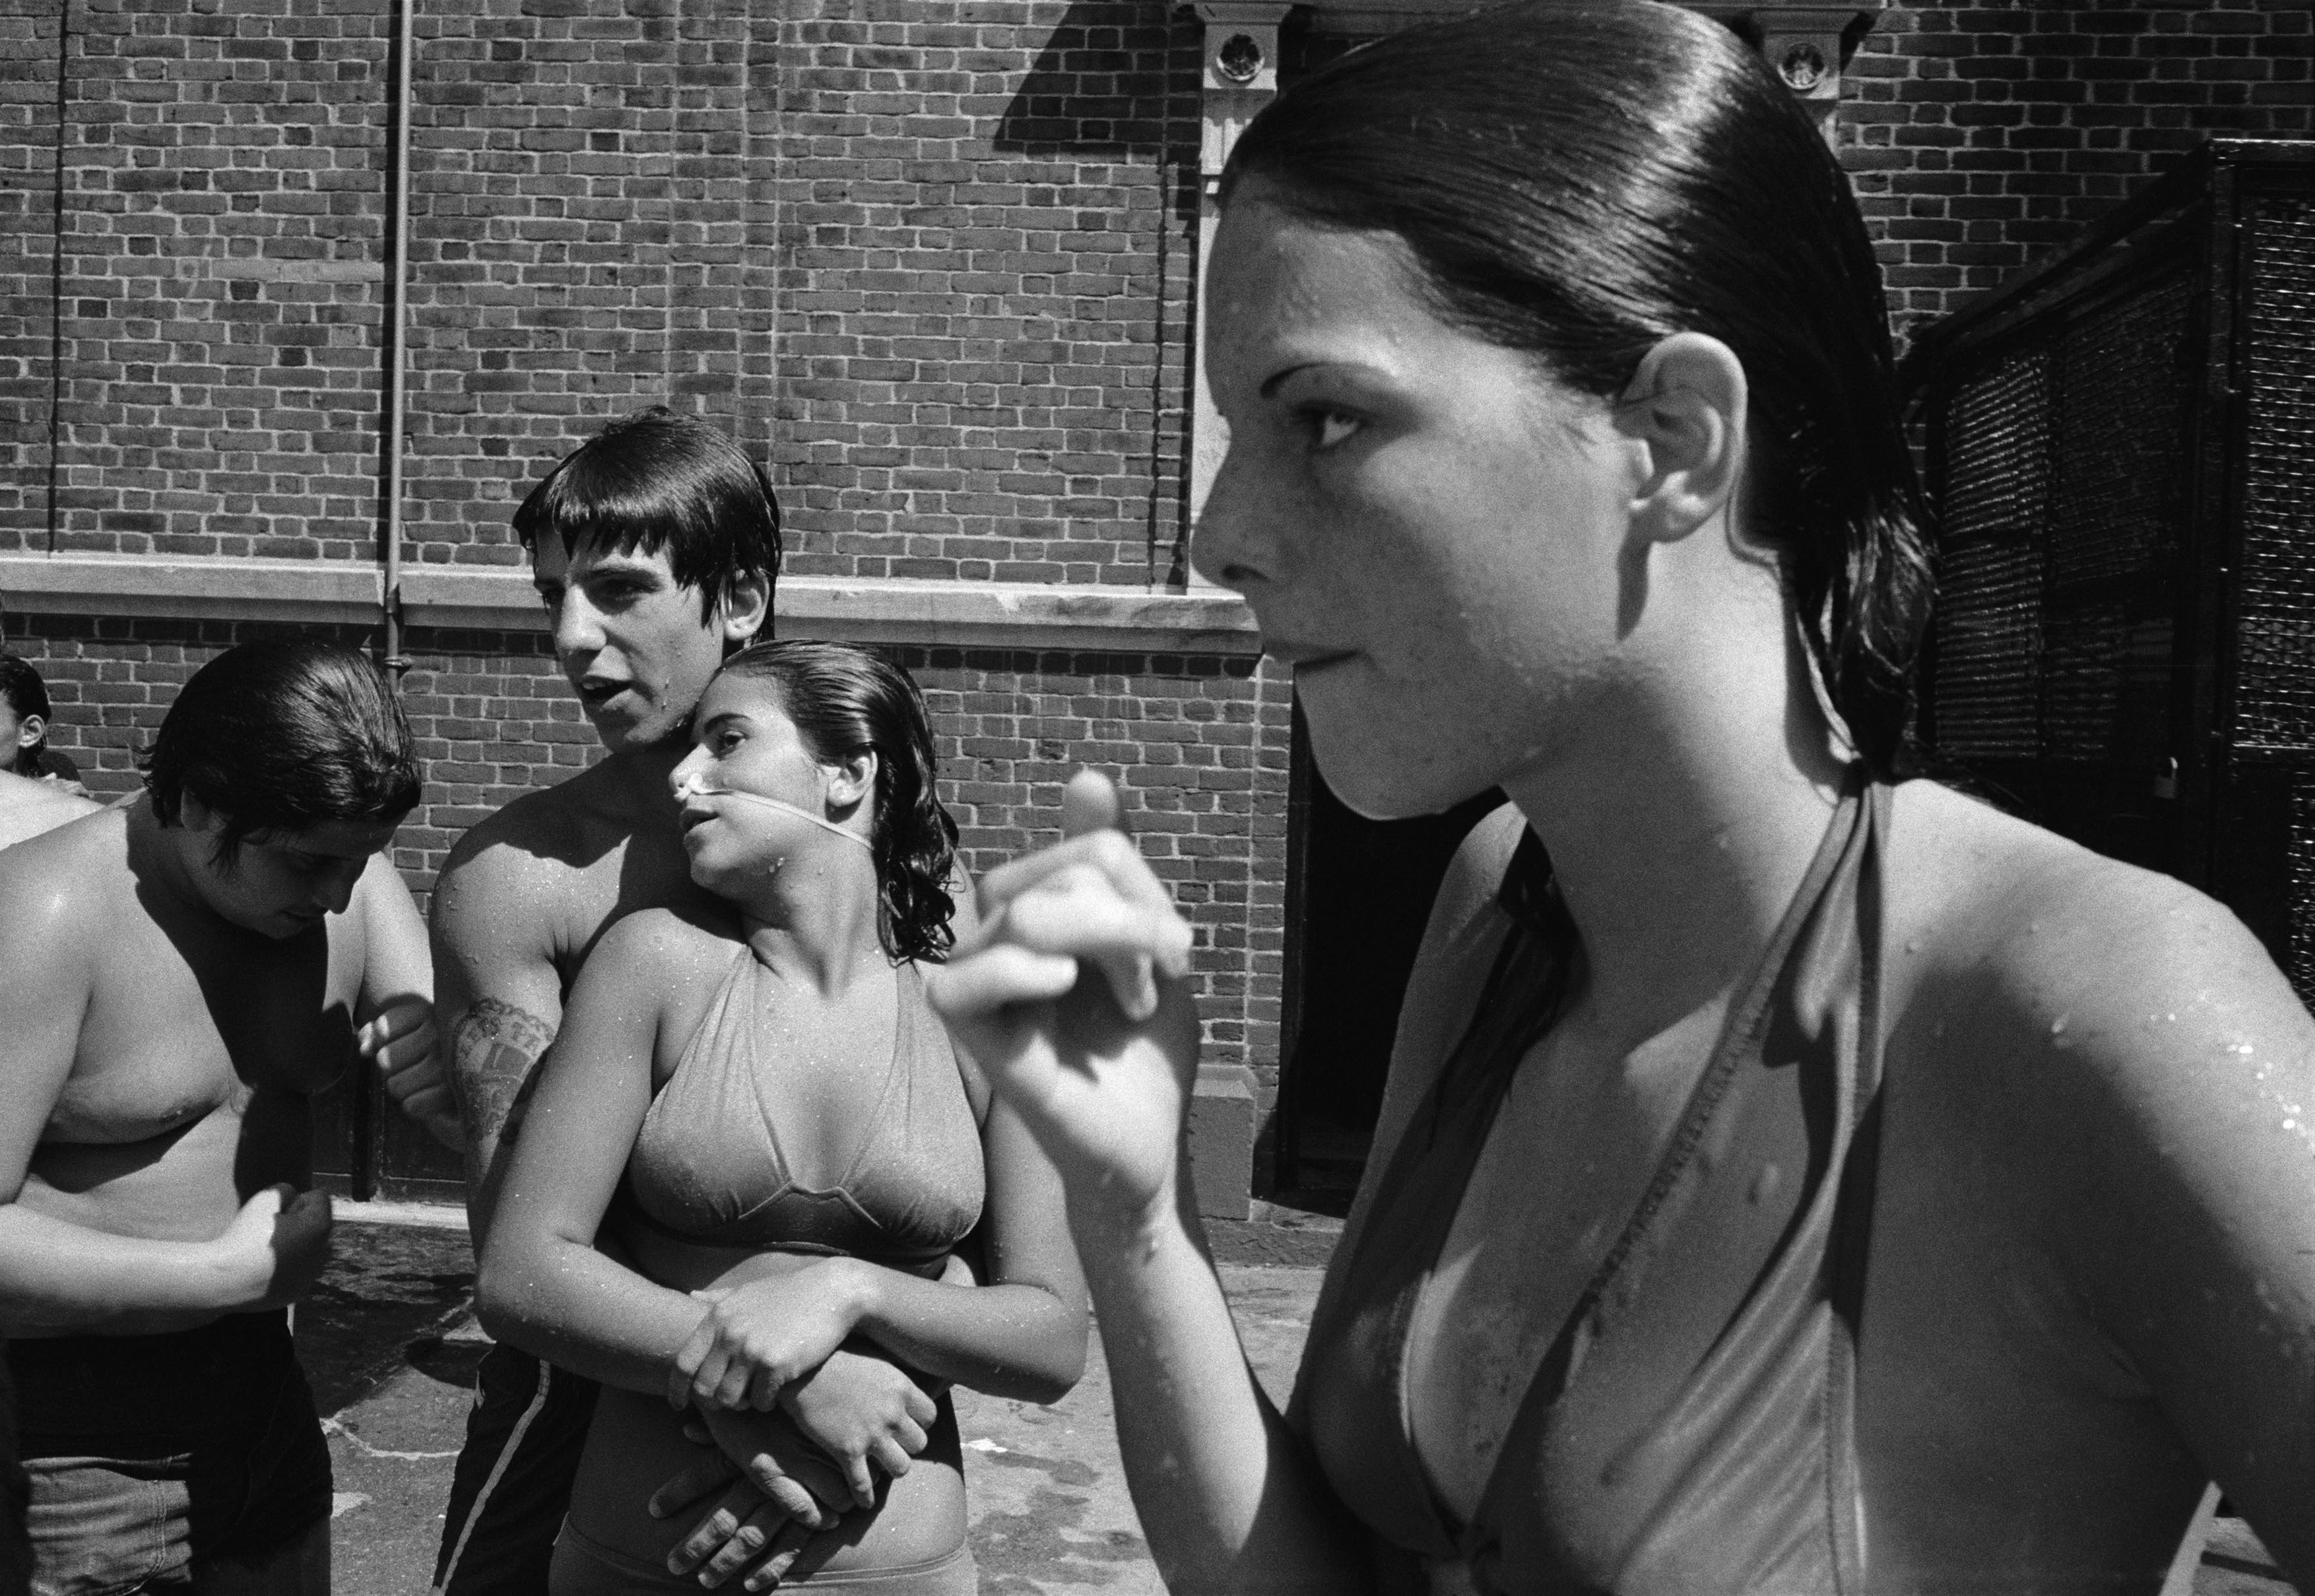 10 Susan Meiselas Pebbles with Enzo and Tina at the Carmine Street pool Little Italy New York City 1978